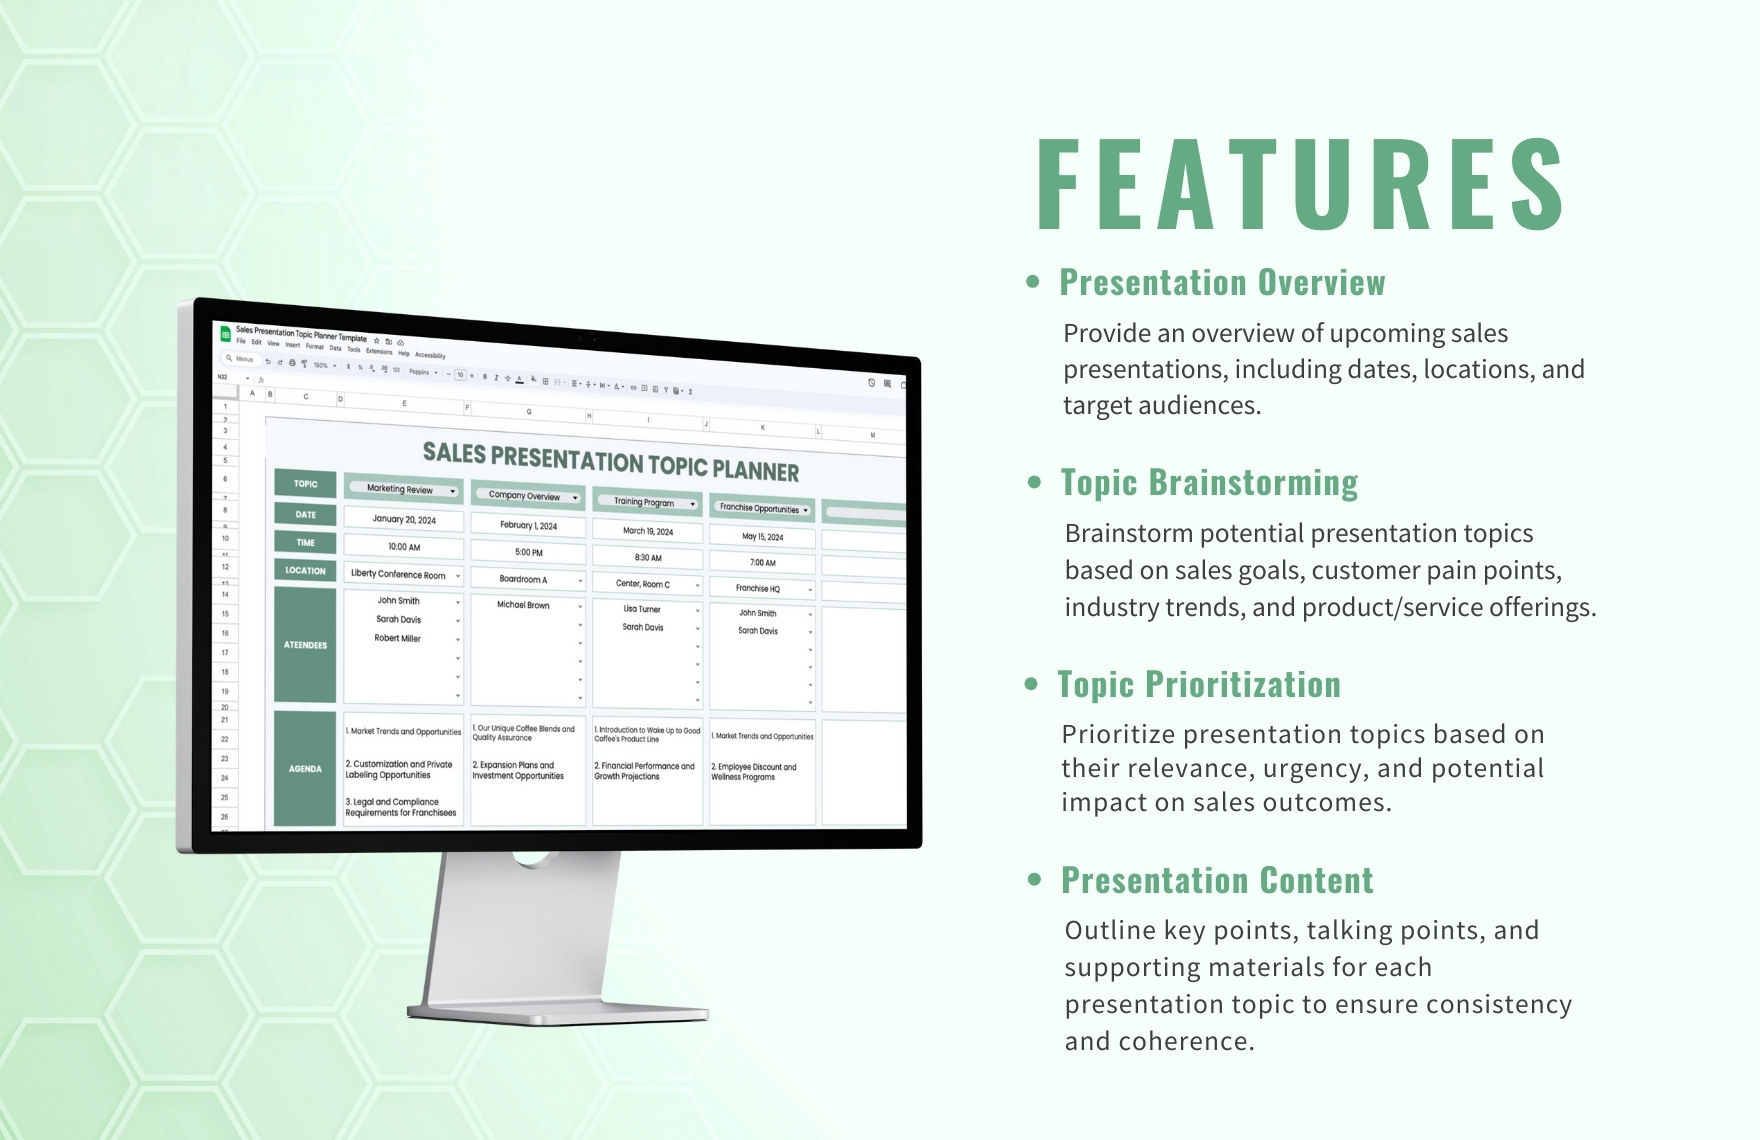 Sales Presentation Topic Planner Template